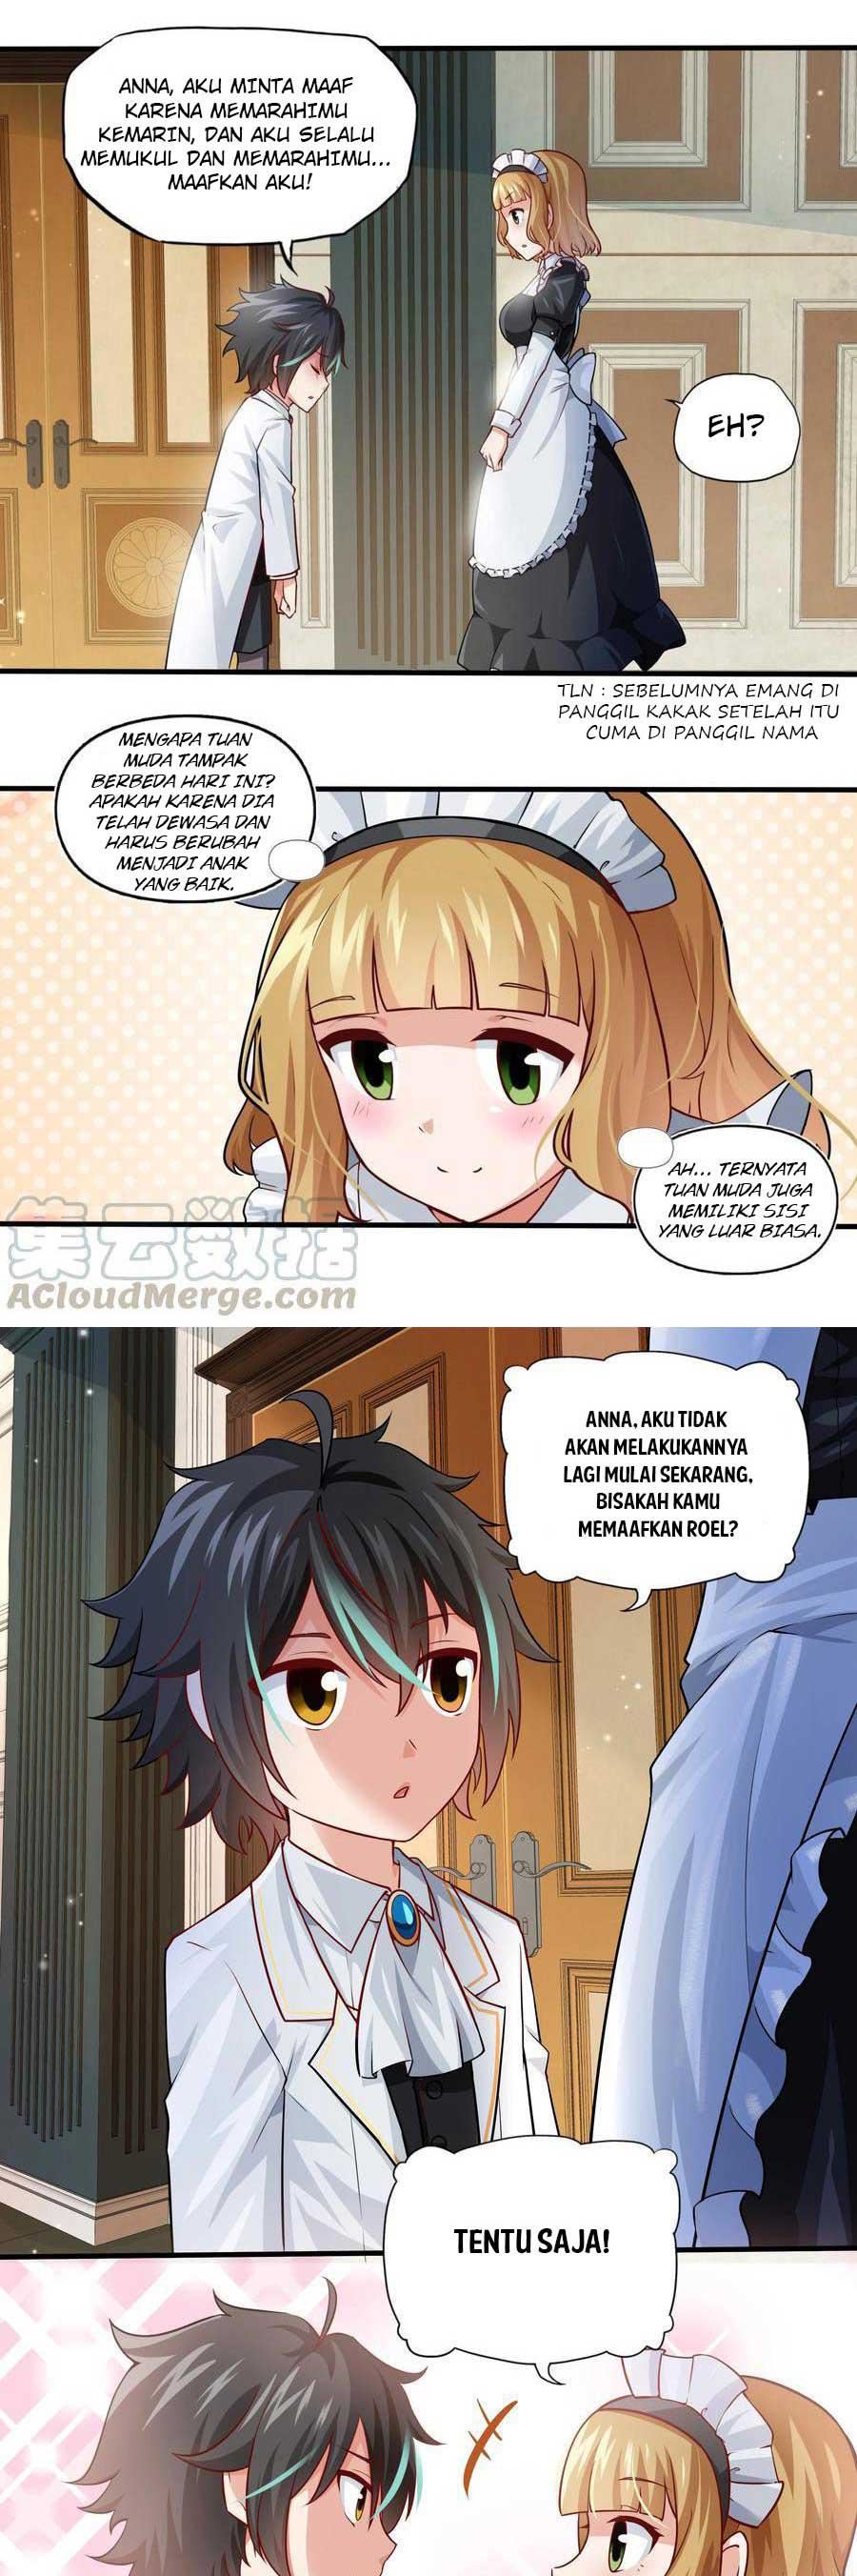 Dilarang COPAS - situs resmi www.mangacanblog.com - Komik little tyrant doesnt want to meet with a bad end 001 - chapter 1 2 Indonesia little tyrant doesnt want to meet with a bad end 001 - chapter 1 Terbaru 19|Baca Manga Komik Indonesia|Mangacan